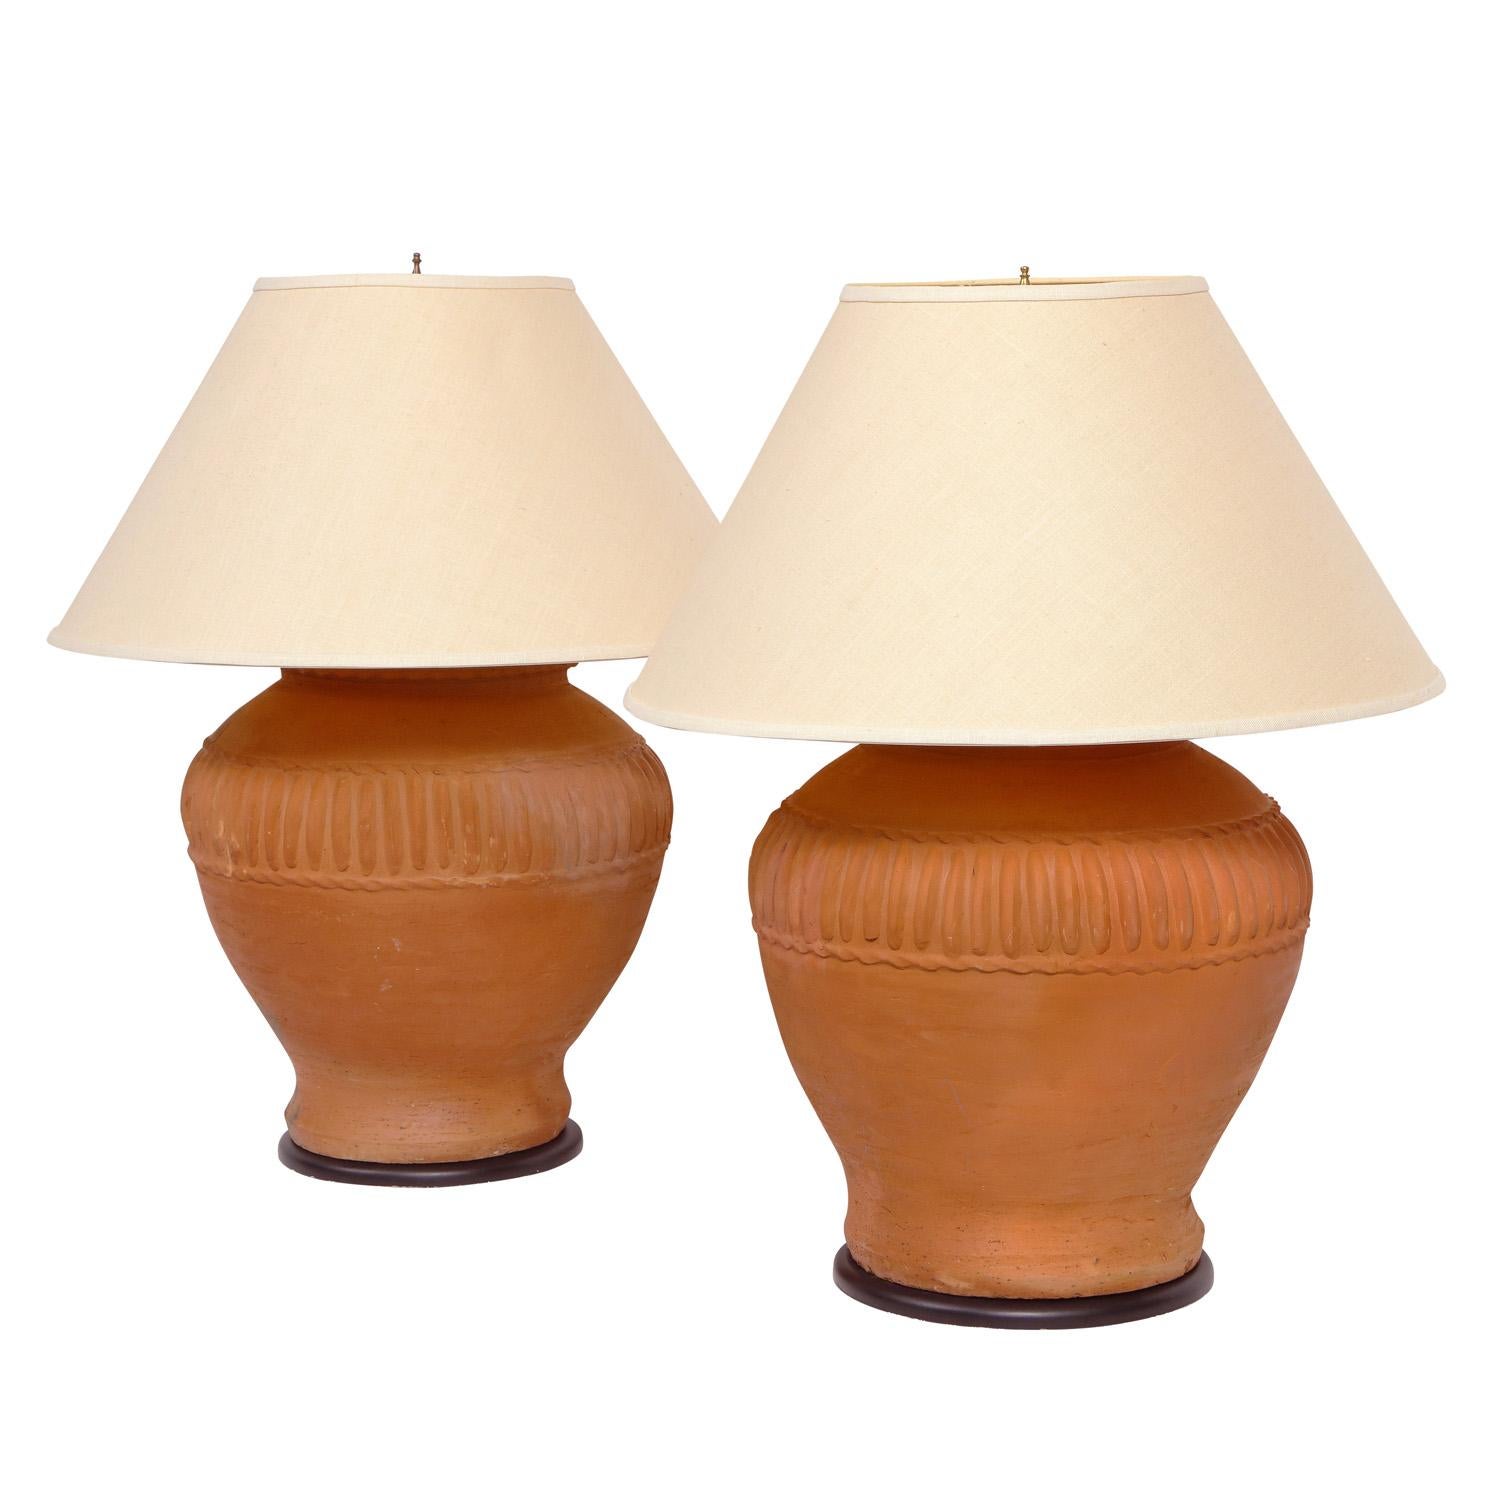 Pair of large artisan made terracotta table lamps, American 1970's. It is rare to see terra cotta lamps in this quality and scale. These came from a published 1970’s interior.